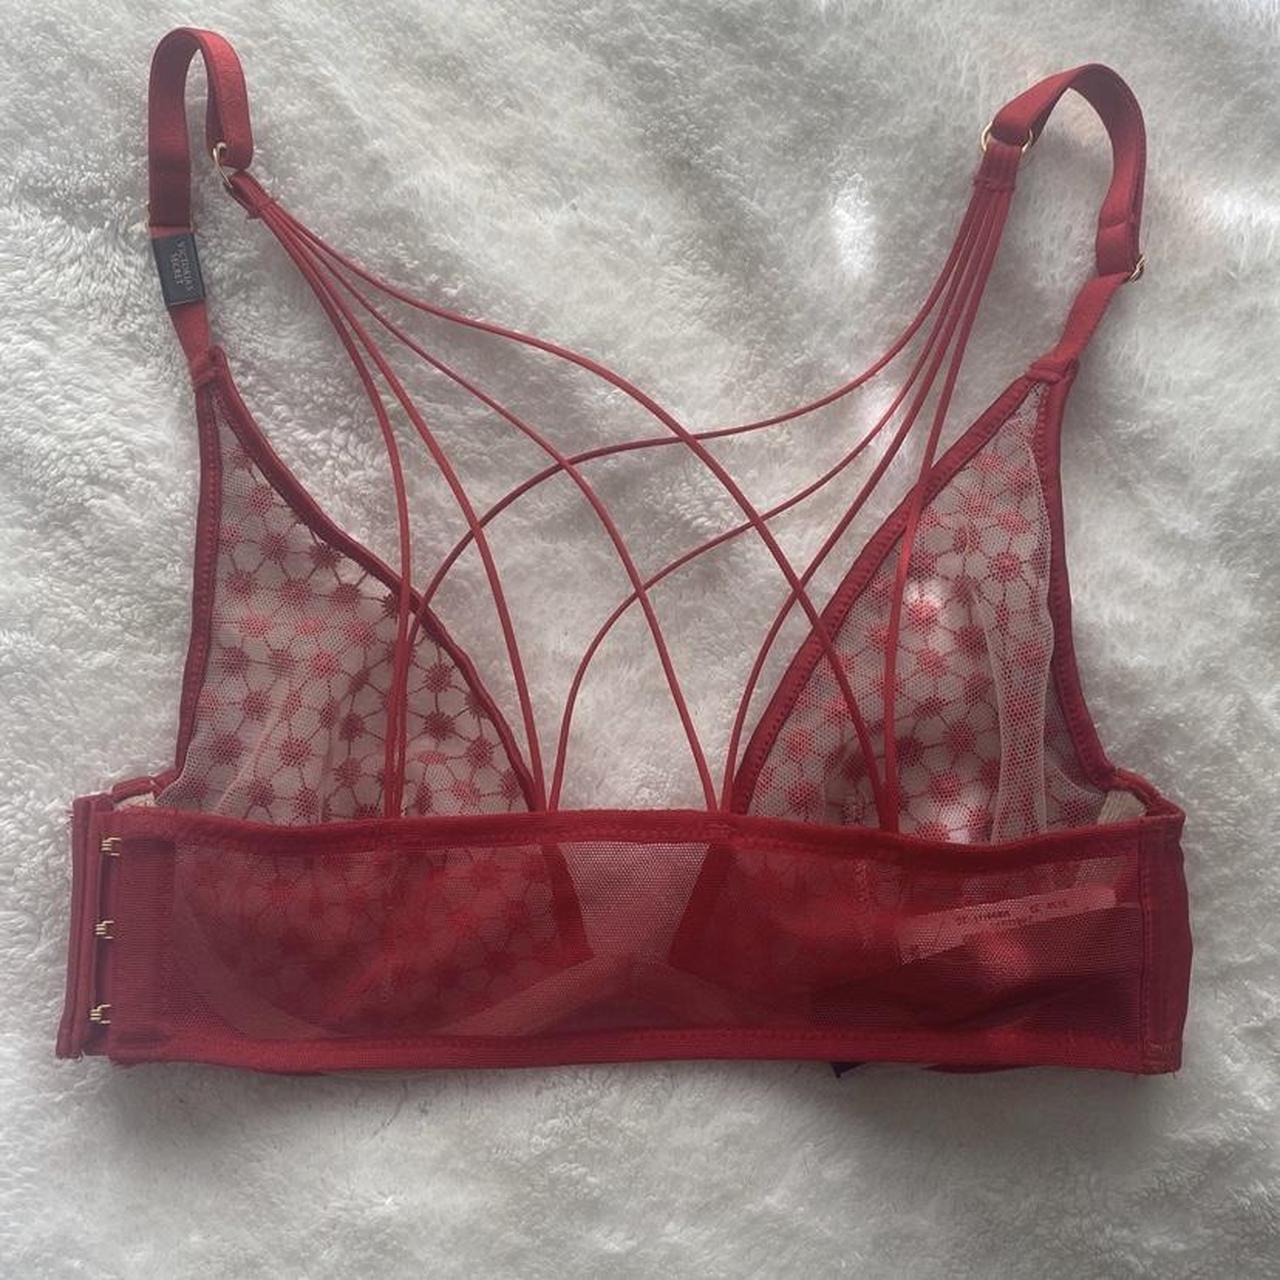 Brand new with tags. Victoria’s Secret bralette